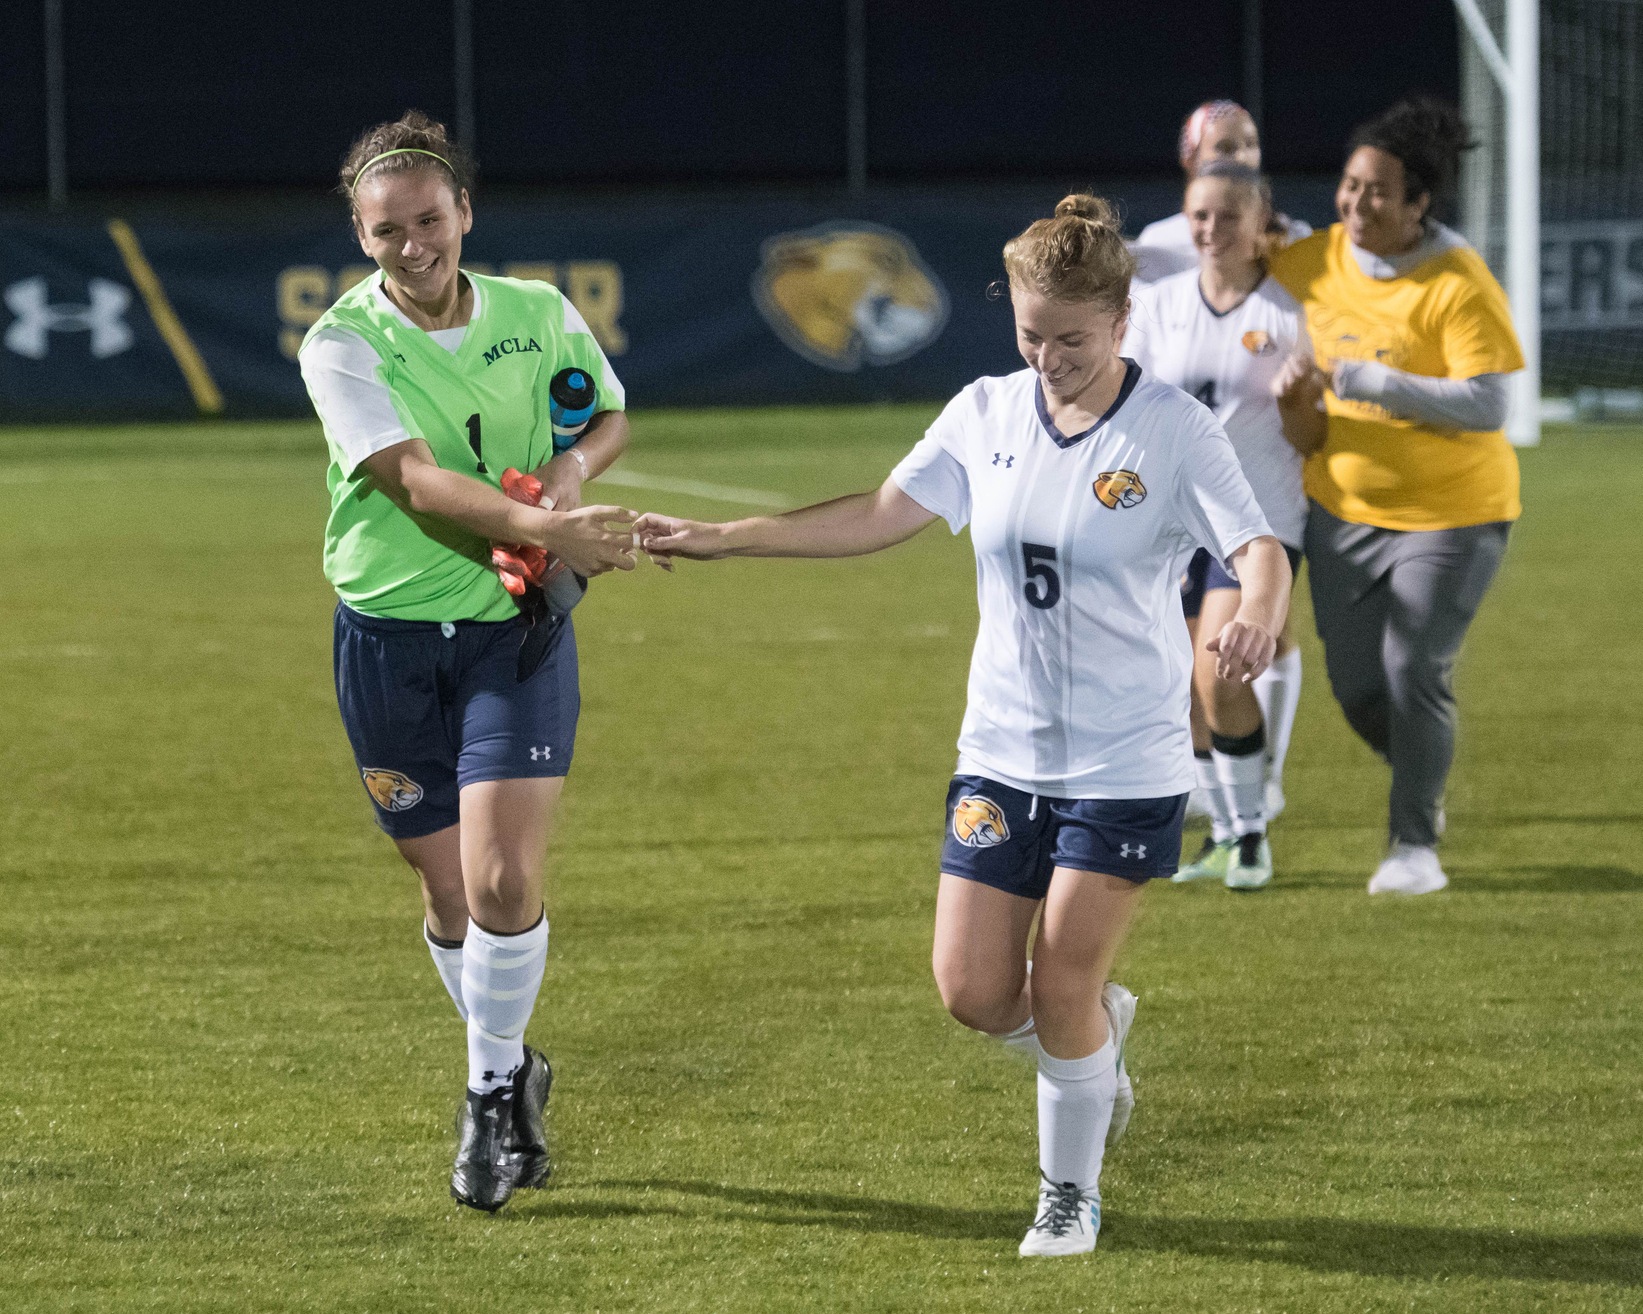 Mangiardi leads women's soccer to 2-0 shutout over Rivier